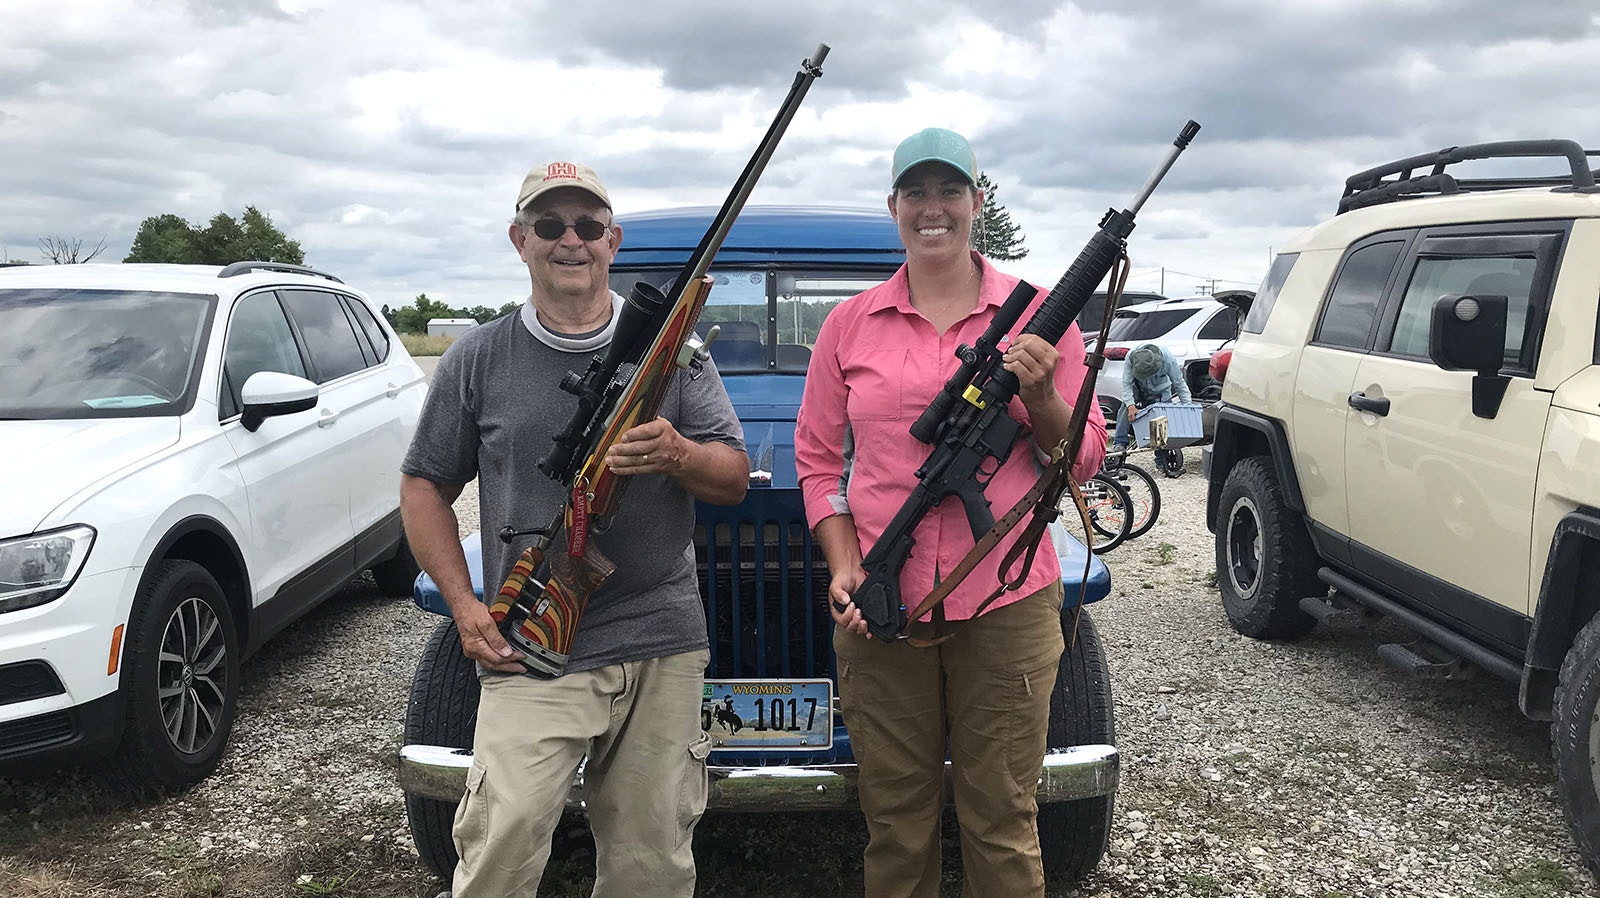 Kenny Lankford of Albany, left, won the National NRA Match Rifle Championship at Camp Atterbury, Indiana in July. He’s pictured with Armanda Elsenboss, winner of the 2023 National NRA Service Rifle Championship and Overall Championship.